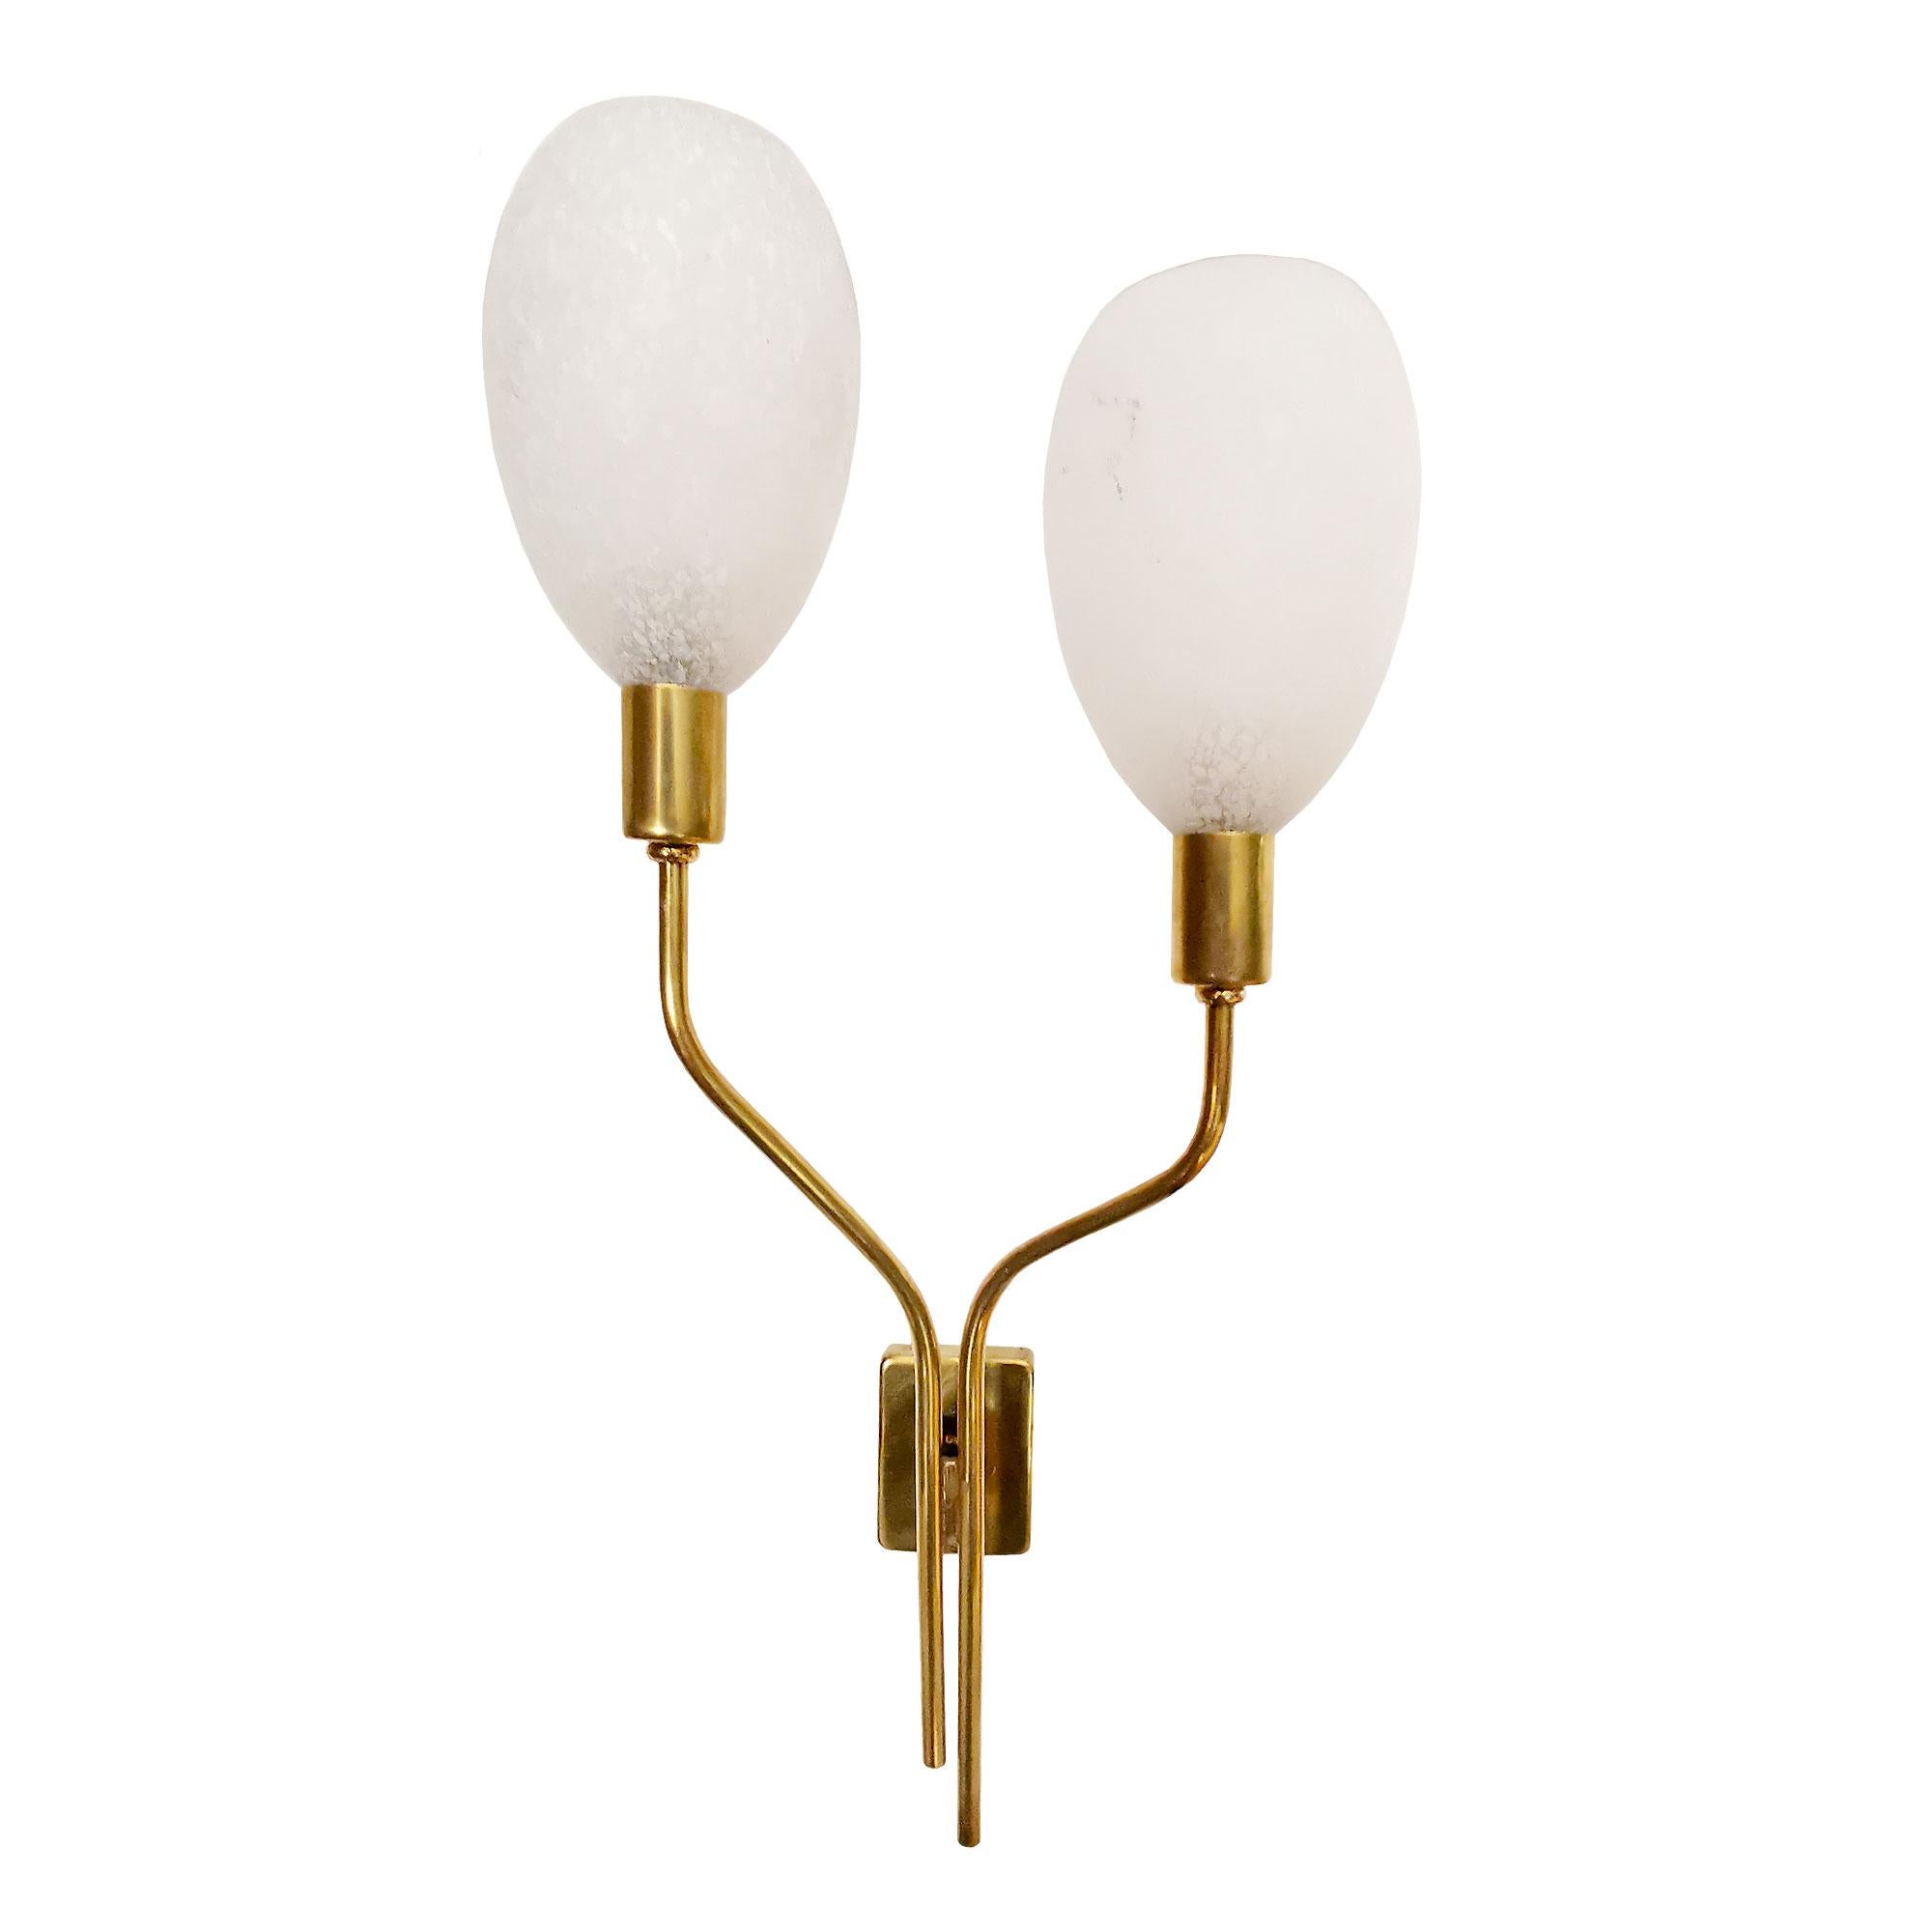 Rare set of six polished brass wall lights, globes in thick white-speckled glass paste.

